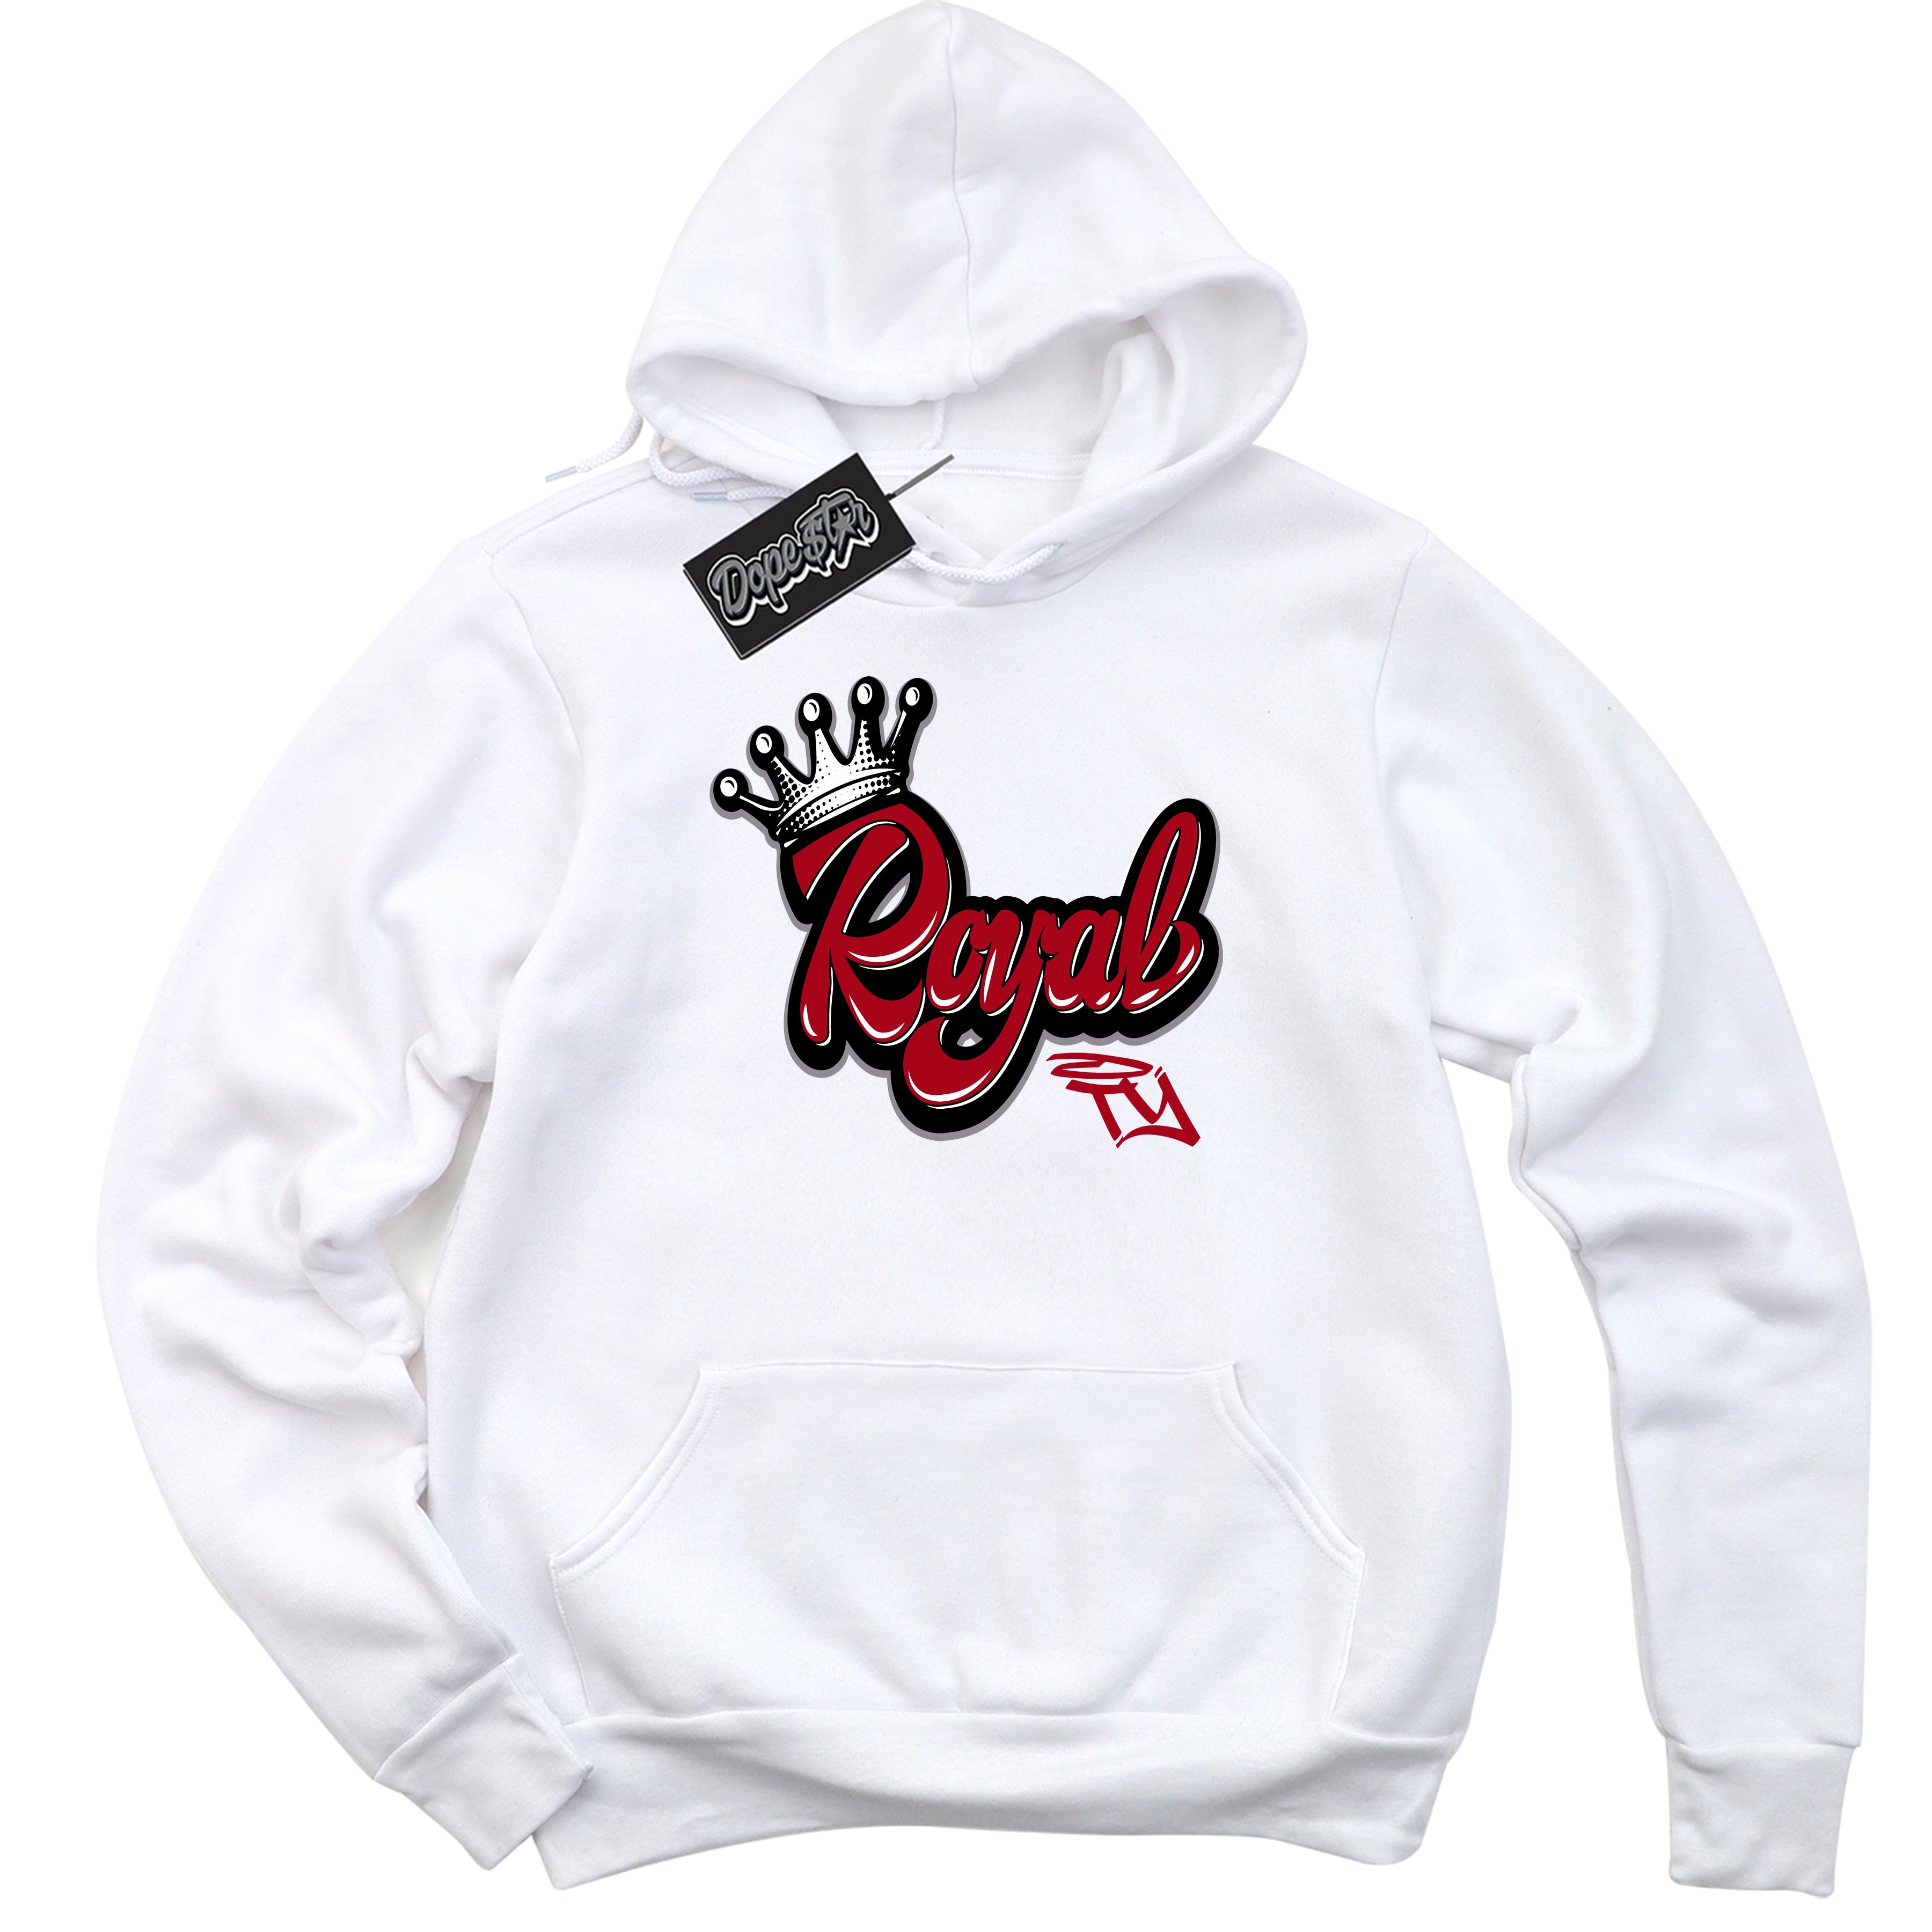 Cool White Hoodie with “ Royalty ”  design that Perfectly Matches Bred Reimagined 4s Jordans.